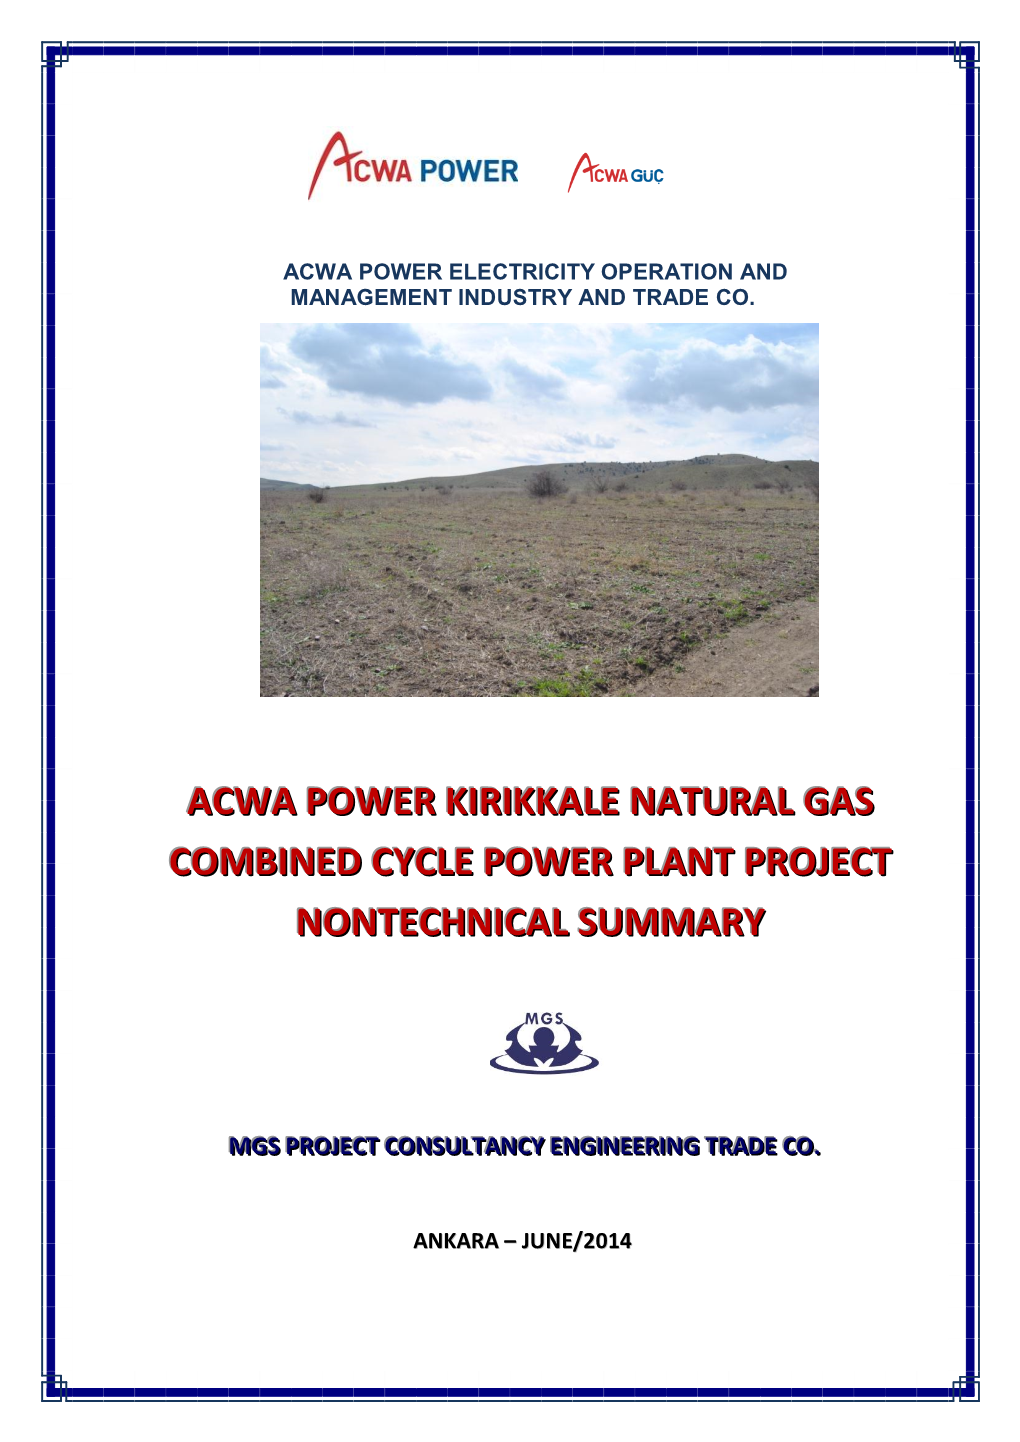 Acwa Power Kirikkale Natural Gas Combined Cycle Power Plant Project Non-Technical Summary